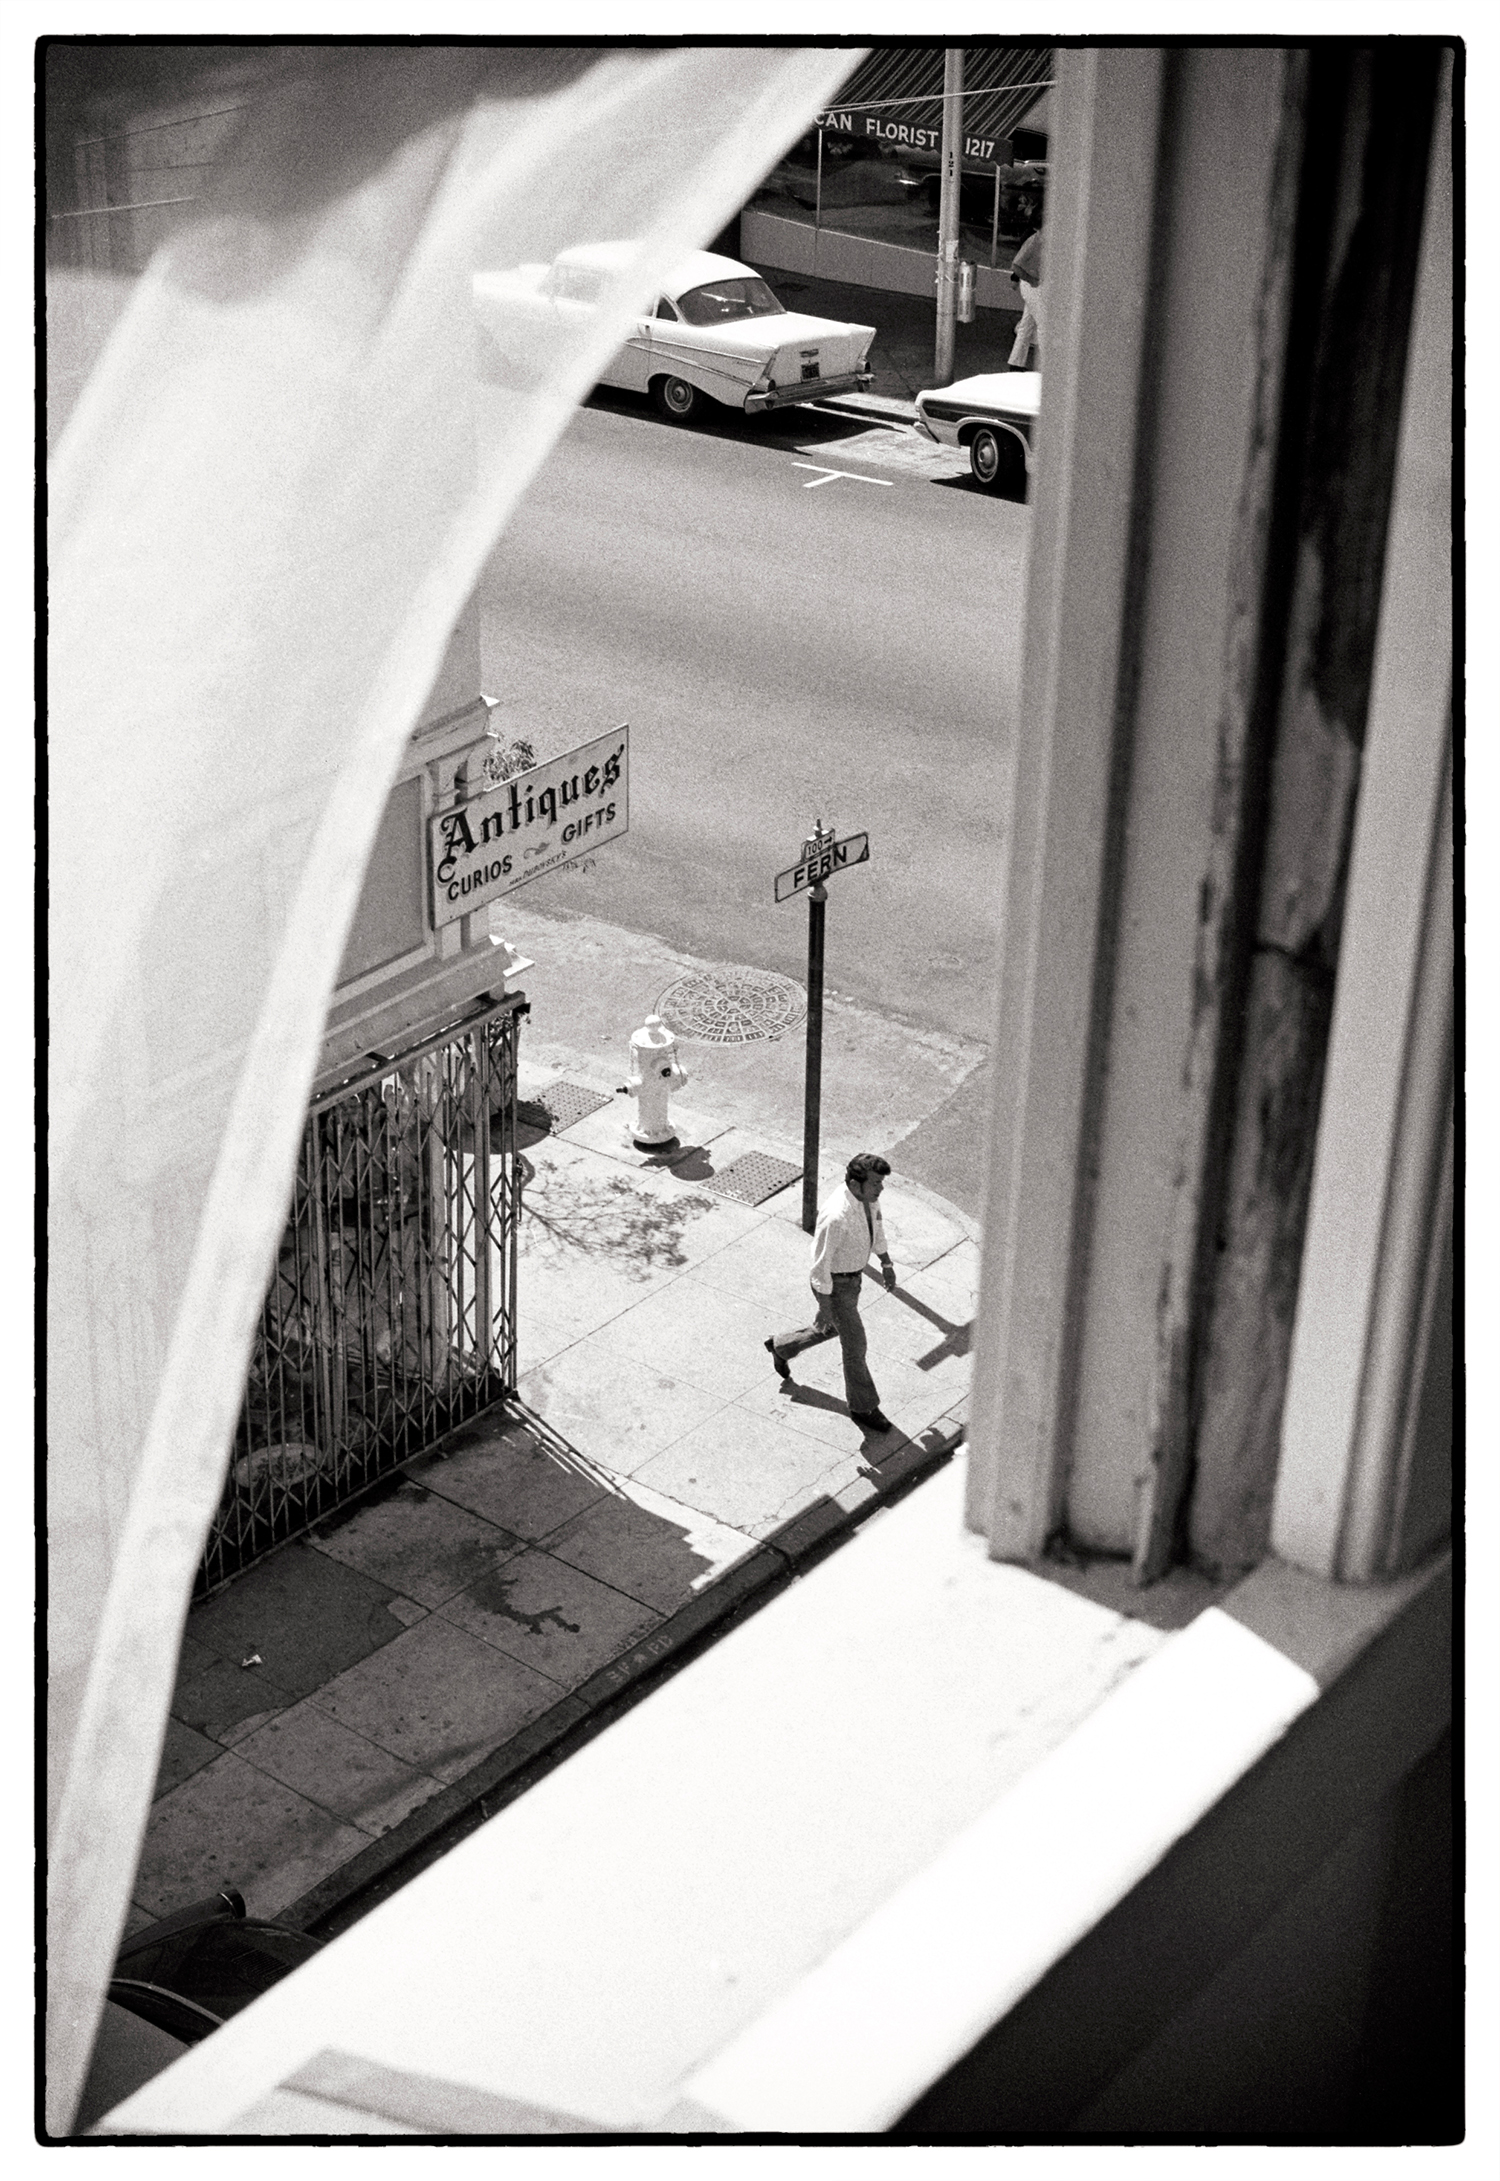 View From My Window, San Francisco, 1972